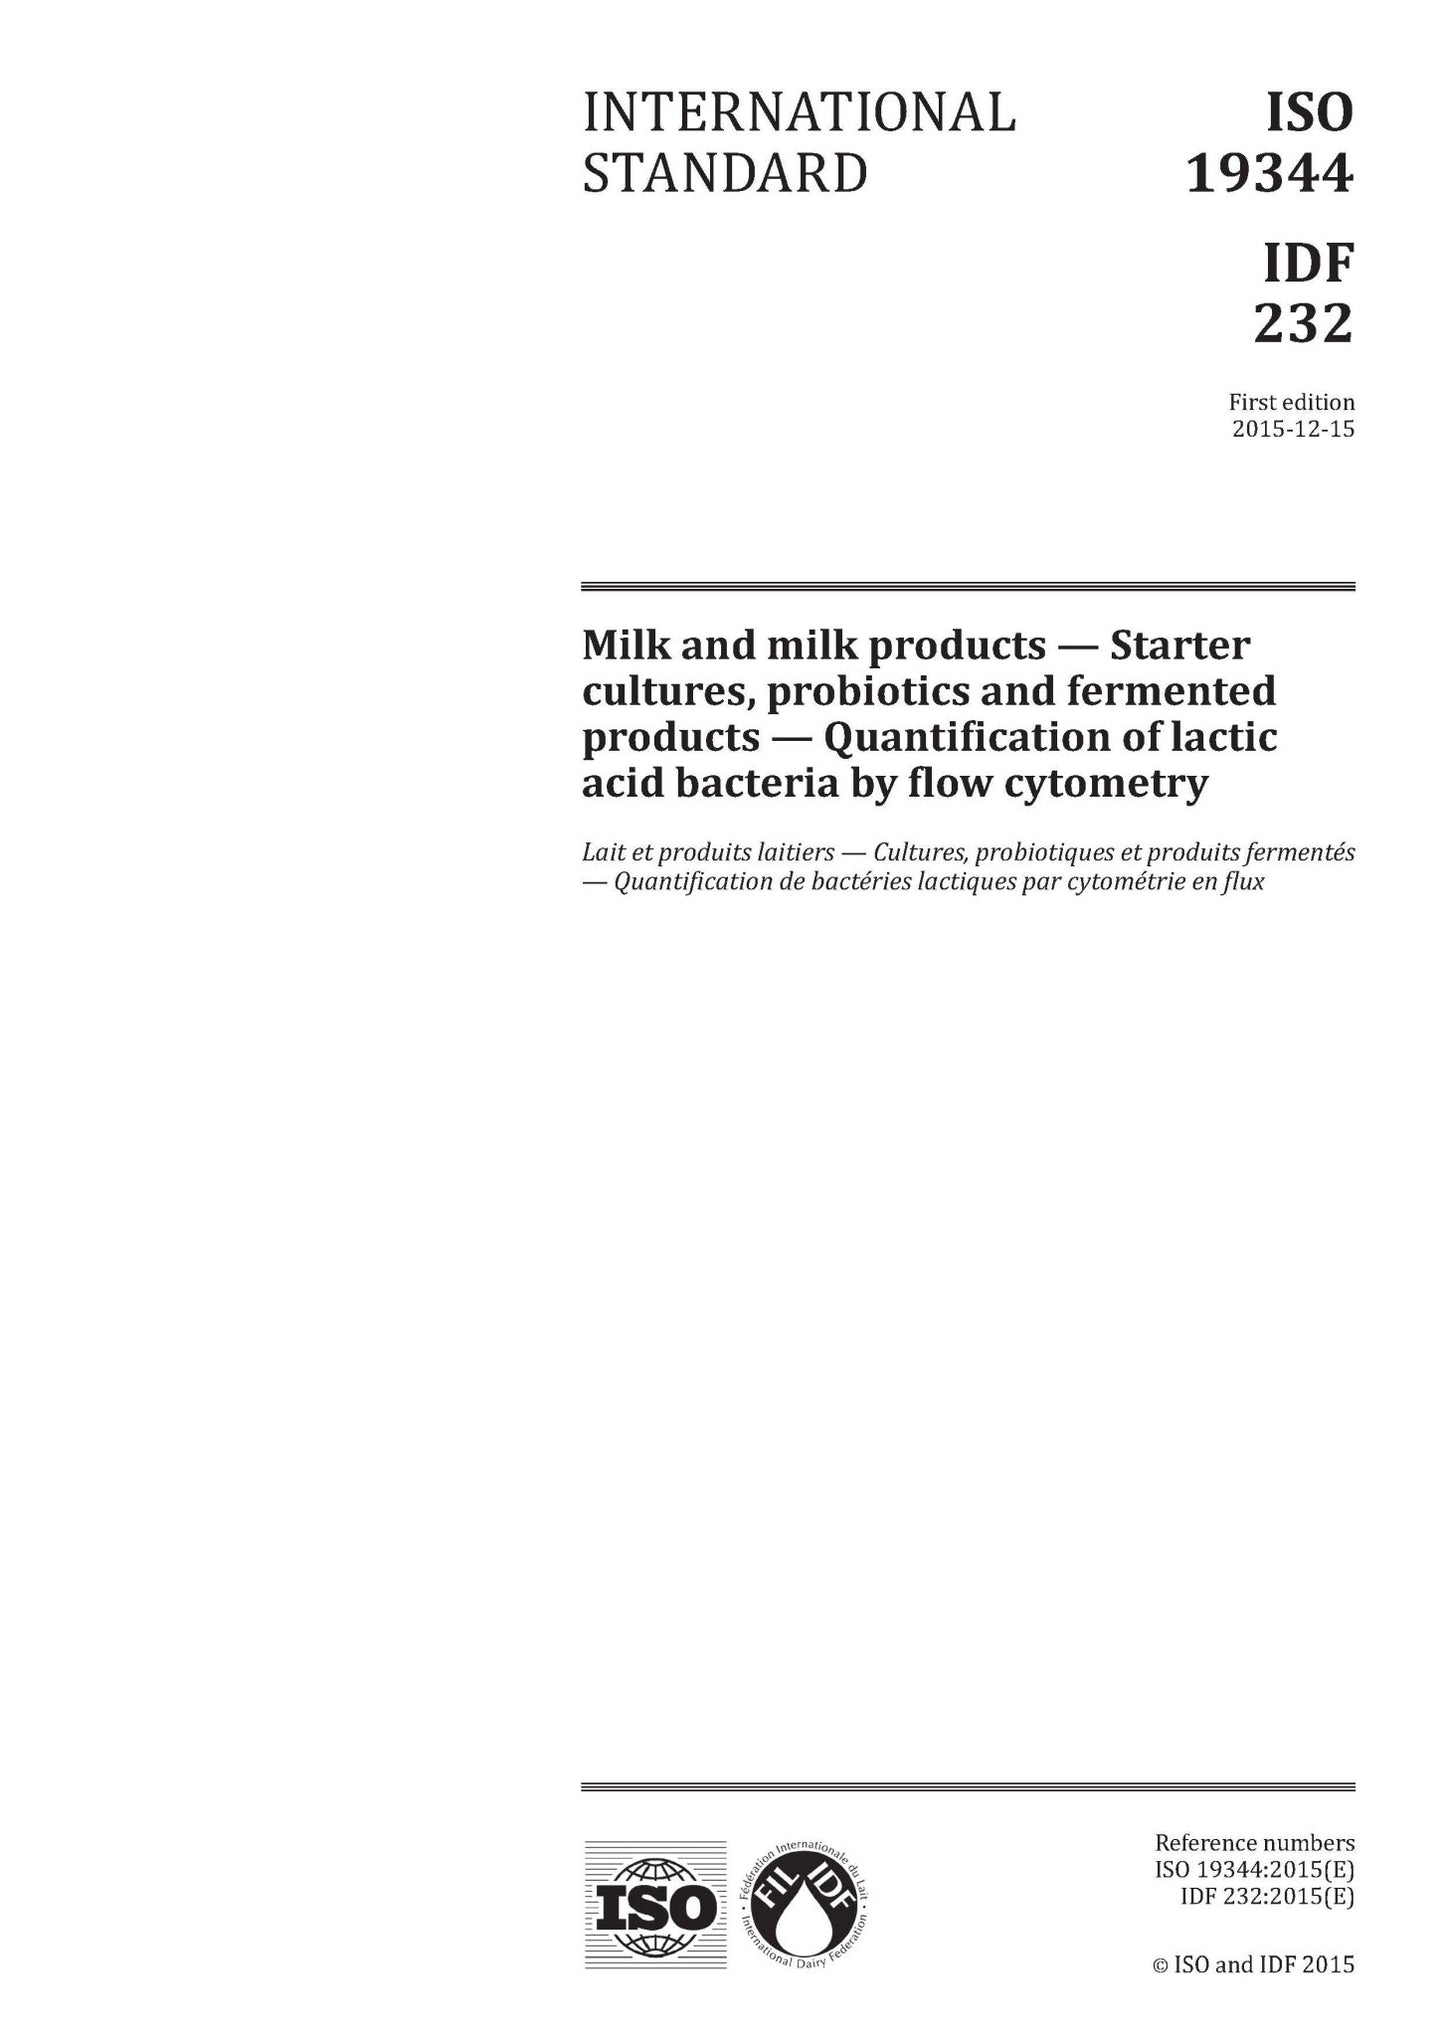 ISO 19344 | IDF 232: 2015 - Milk, milk products - Starter cultures, probiotics and fermented products - Quantification of lactic acid bacteria by flow cytometry - FIL-IDF